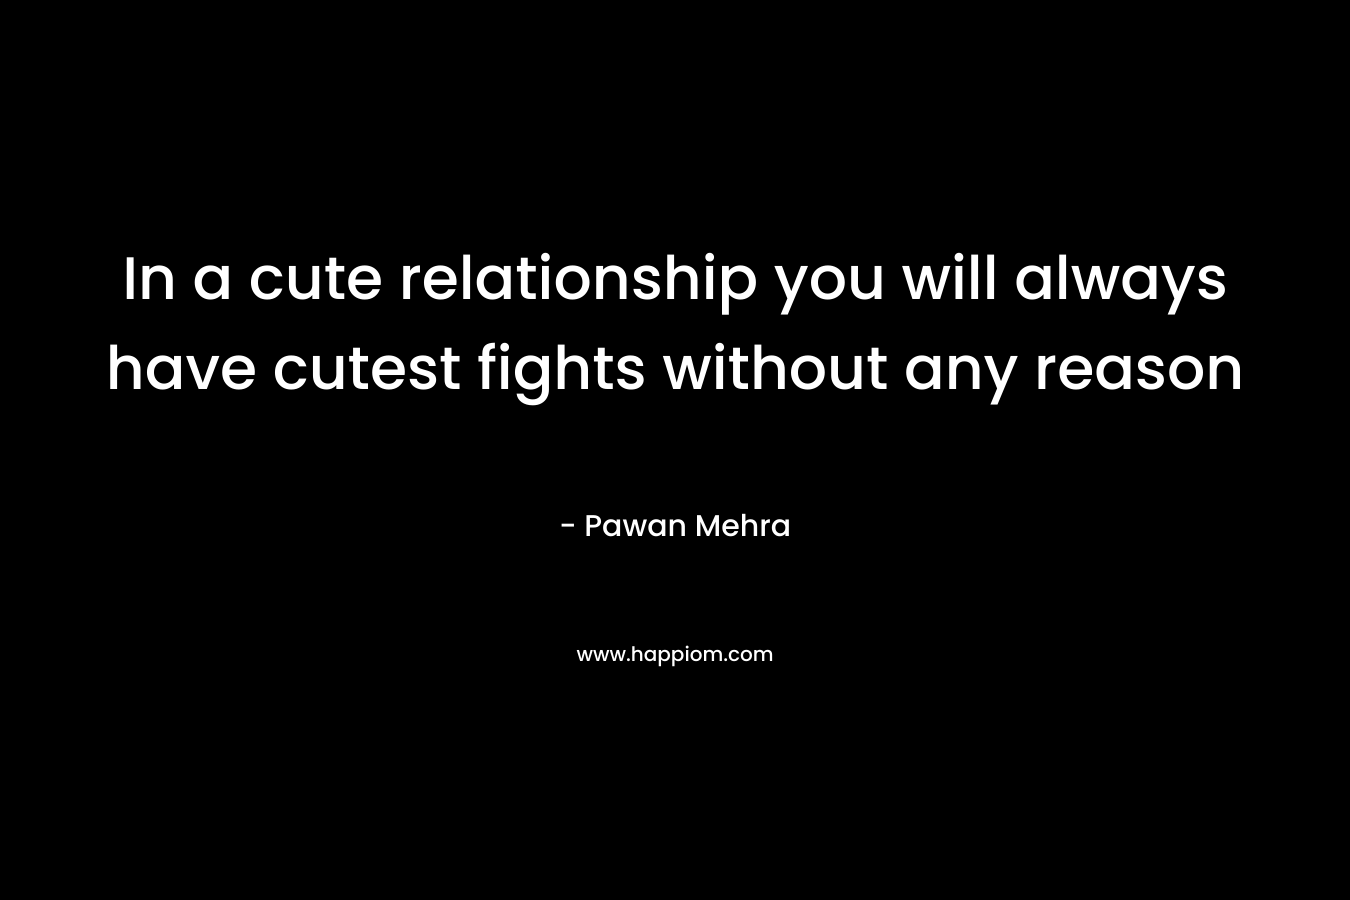 In a cute relationship you will always have cutest fights without any reason